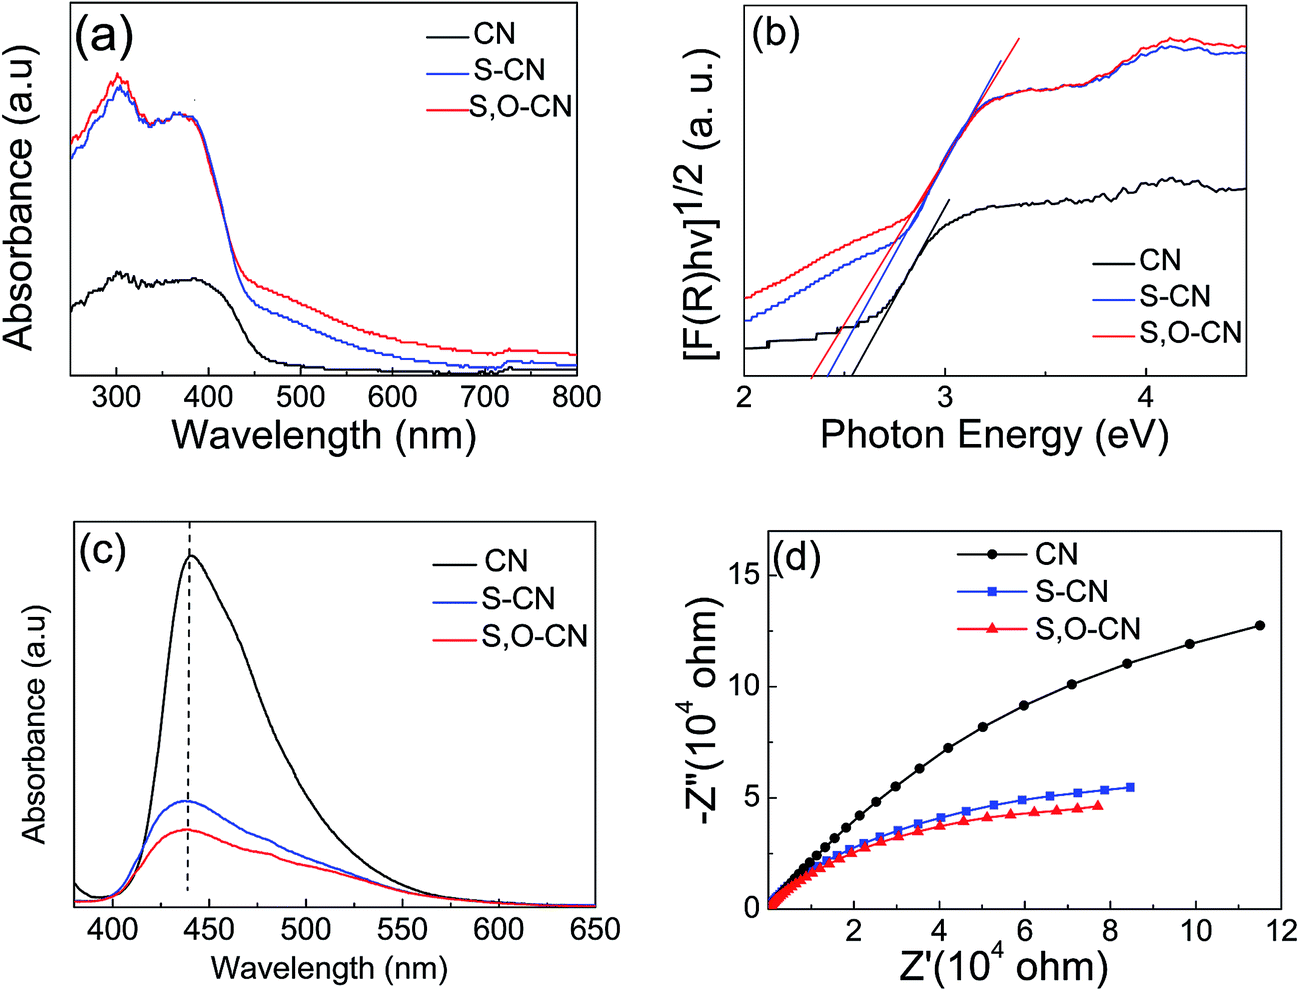 Graphitic Carbon Nitride With S And O Codoping For Enhanced Visible Light Photocatalytic Performance Rsc Advances Rsc Publishing Doi 10 1039 C7rab